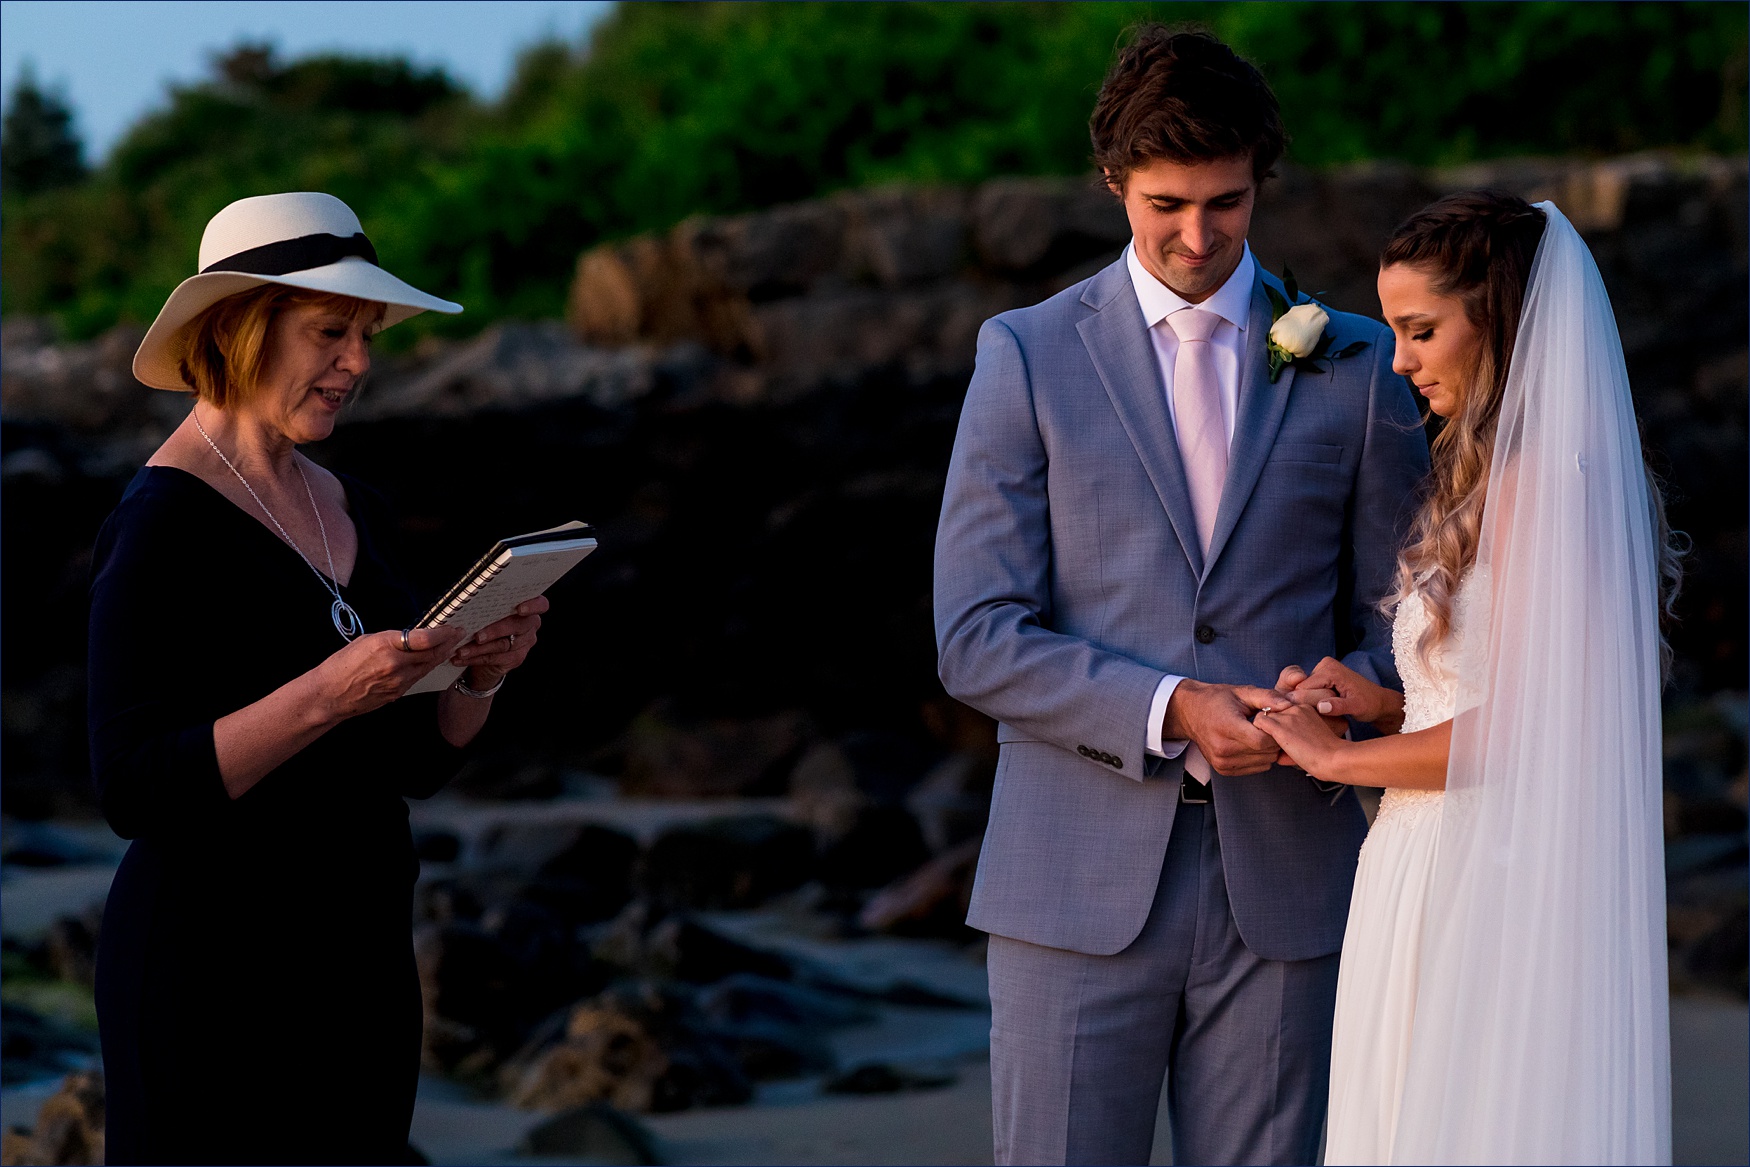 As the sun comes up, the couple listens to readings during their ceremony in Ogunquit Maine